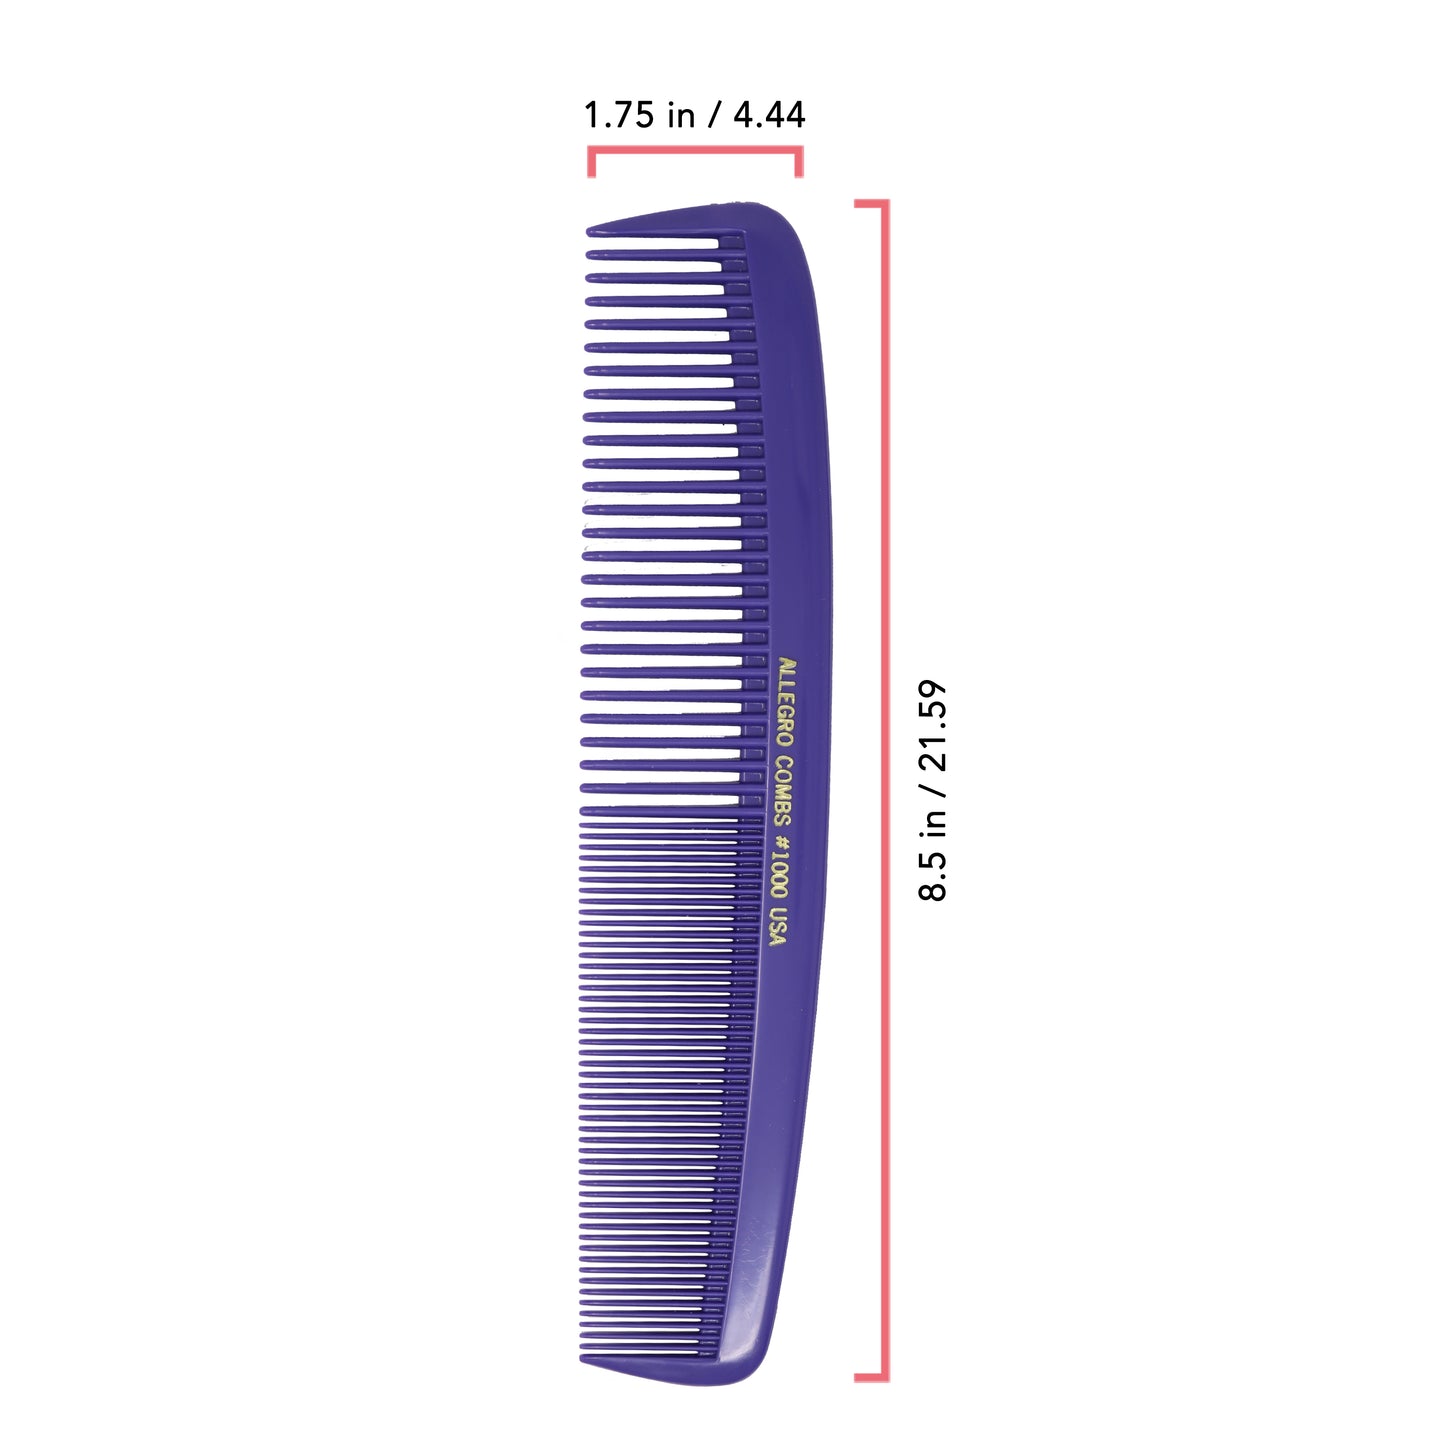 Allegro Combs 1000 X-Large Styling Comb Hair Cutting Barber Stylist Combs All Purpose Wide And Fine Tooth Made In The USA